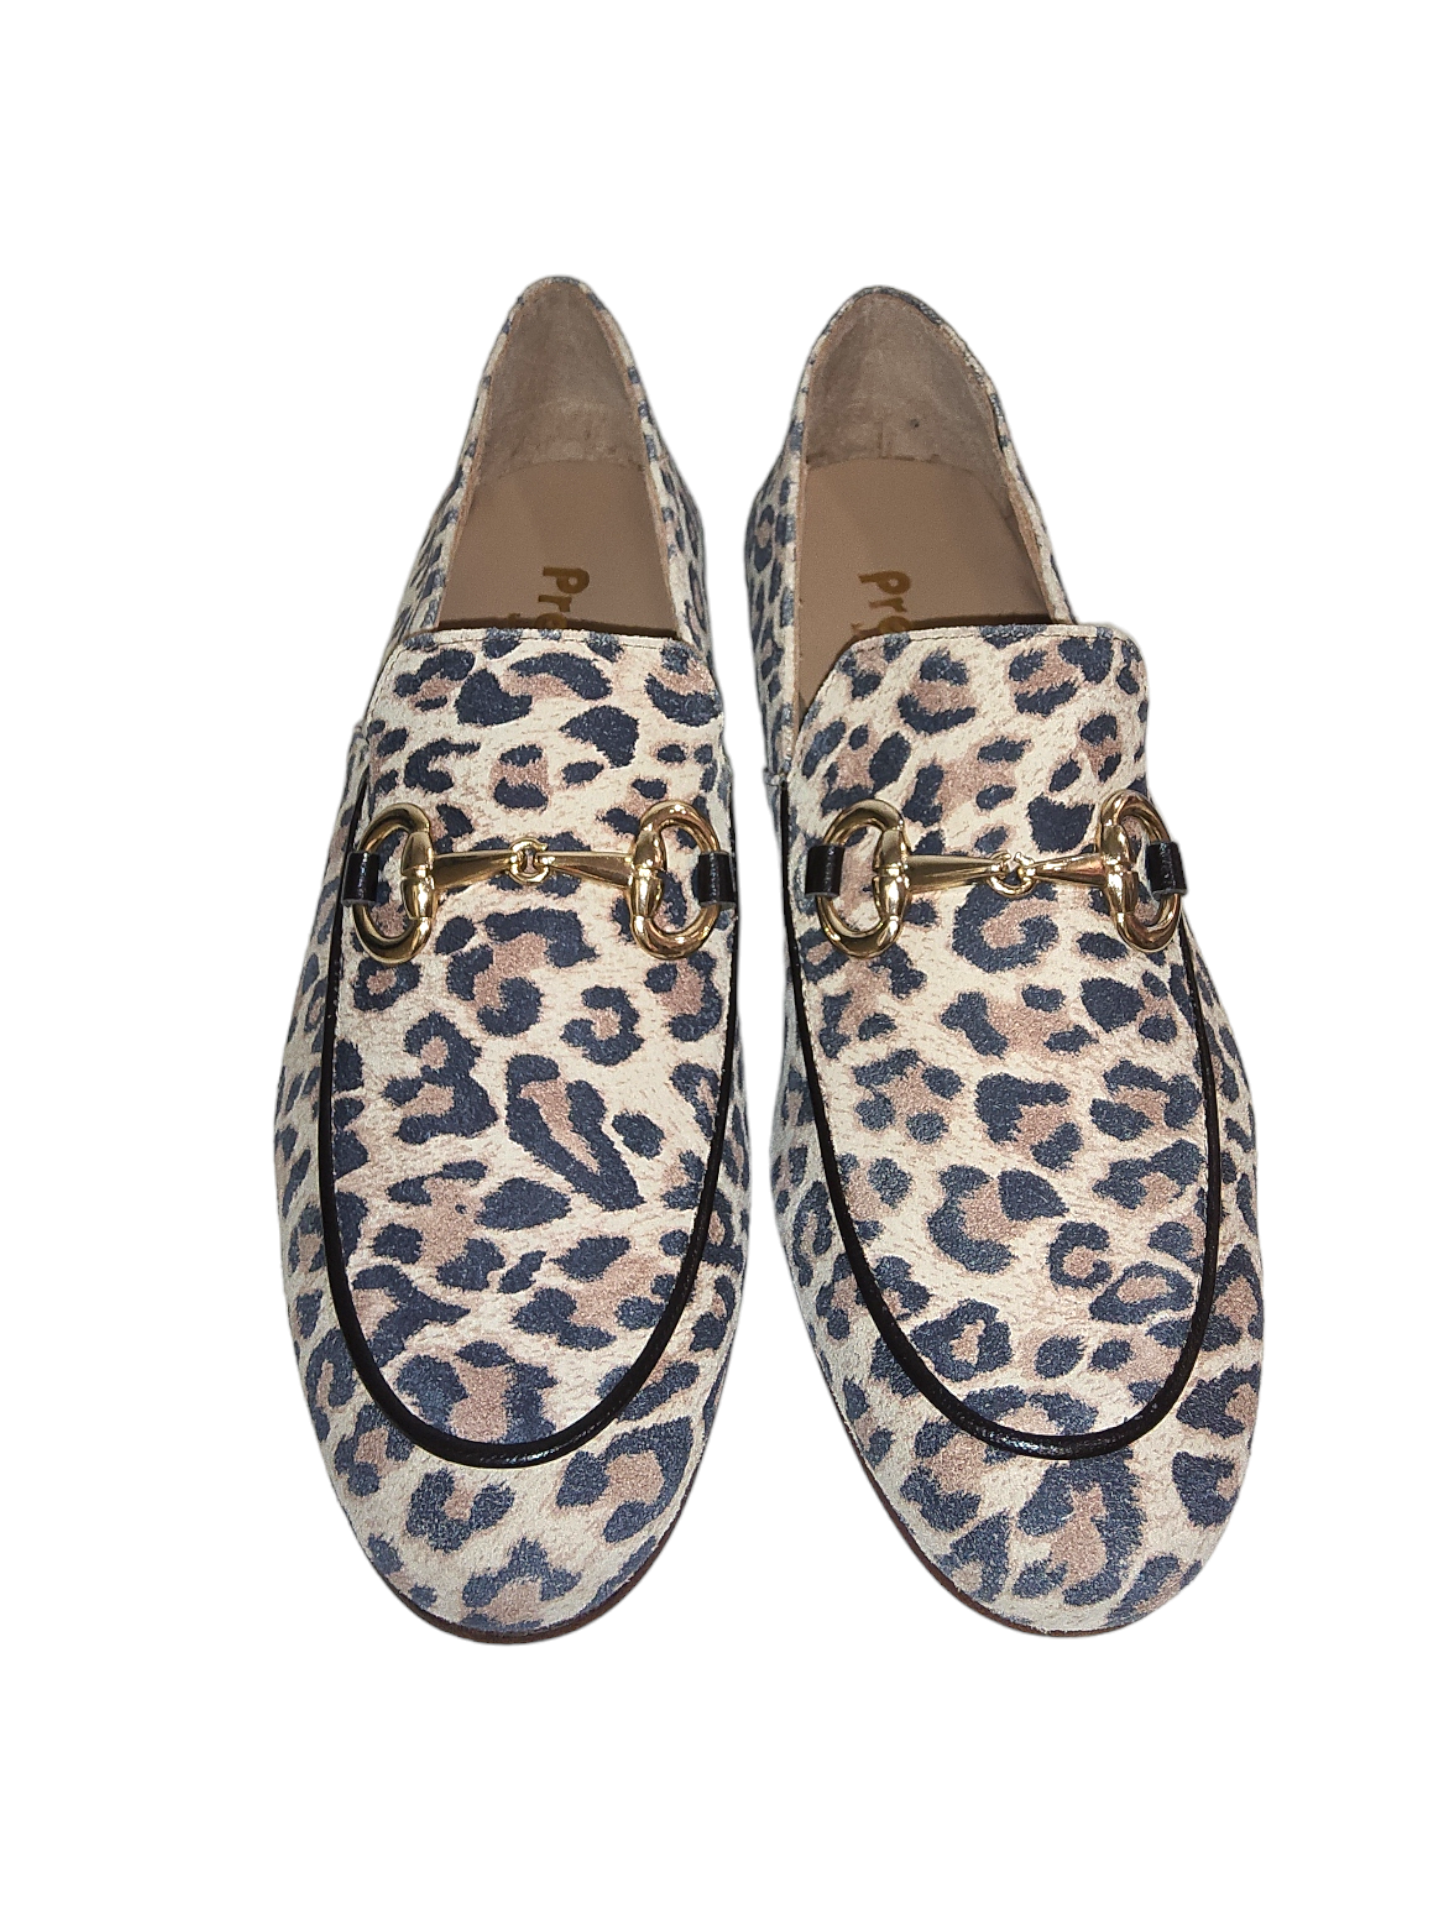 Leopard print loafers